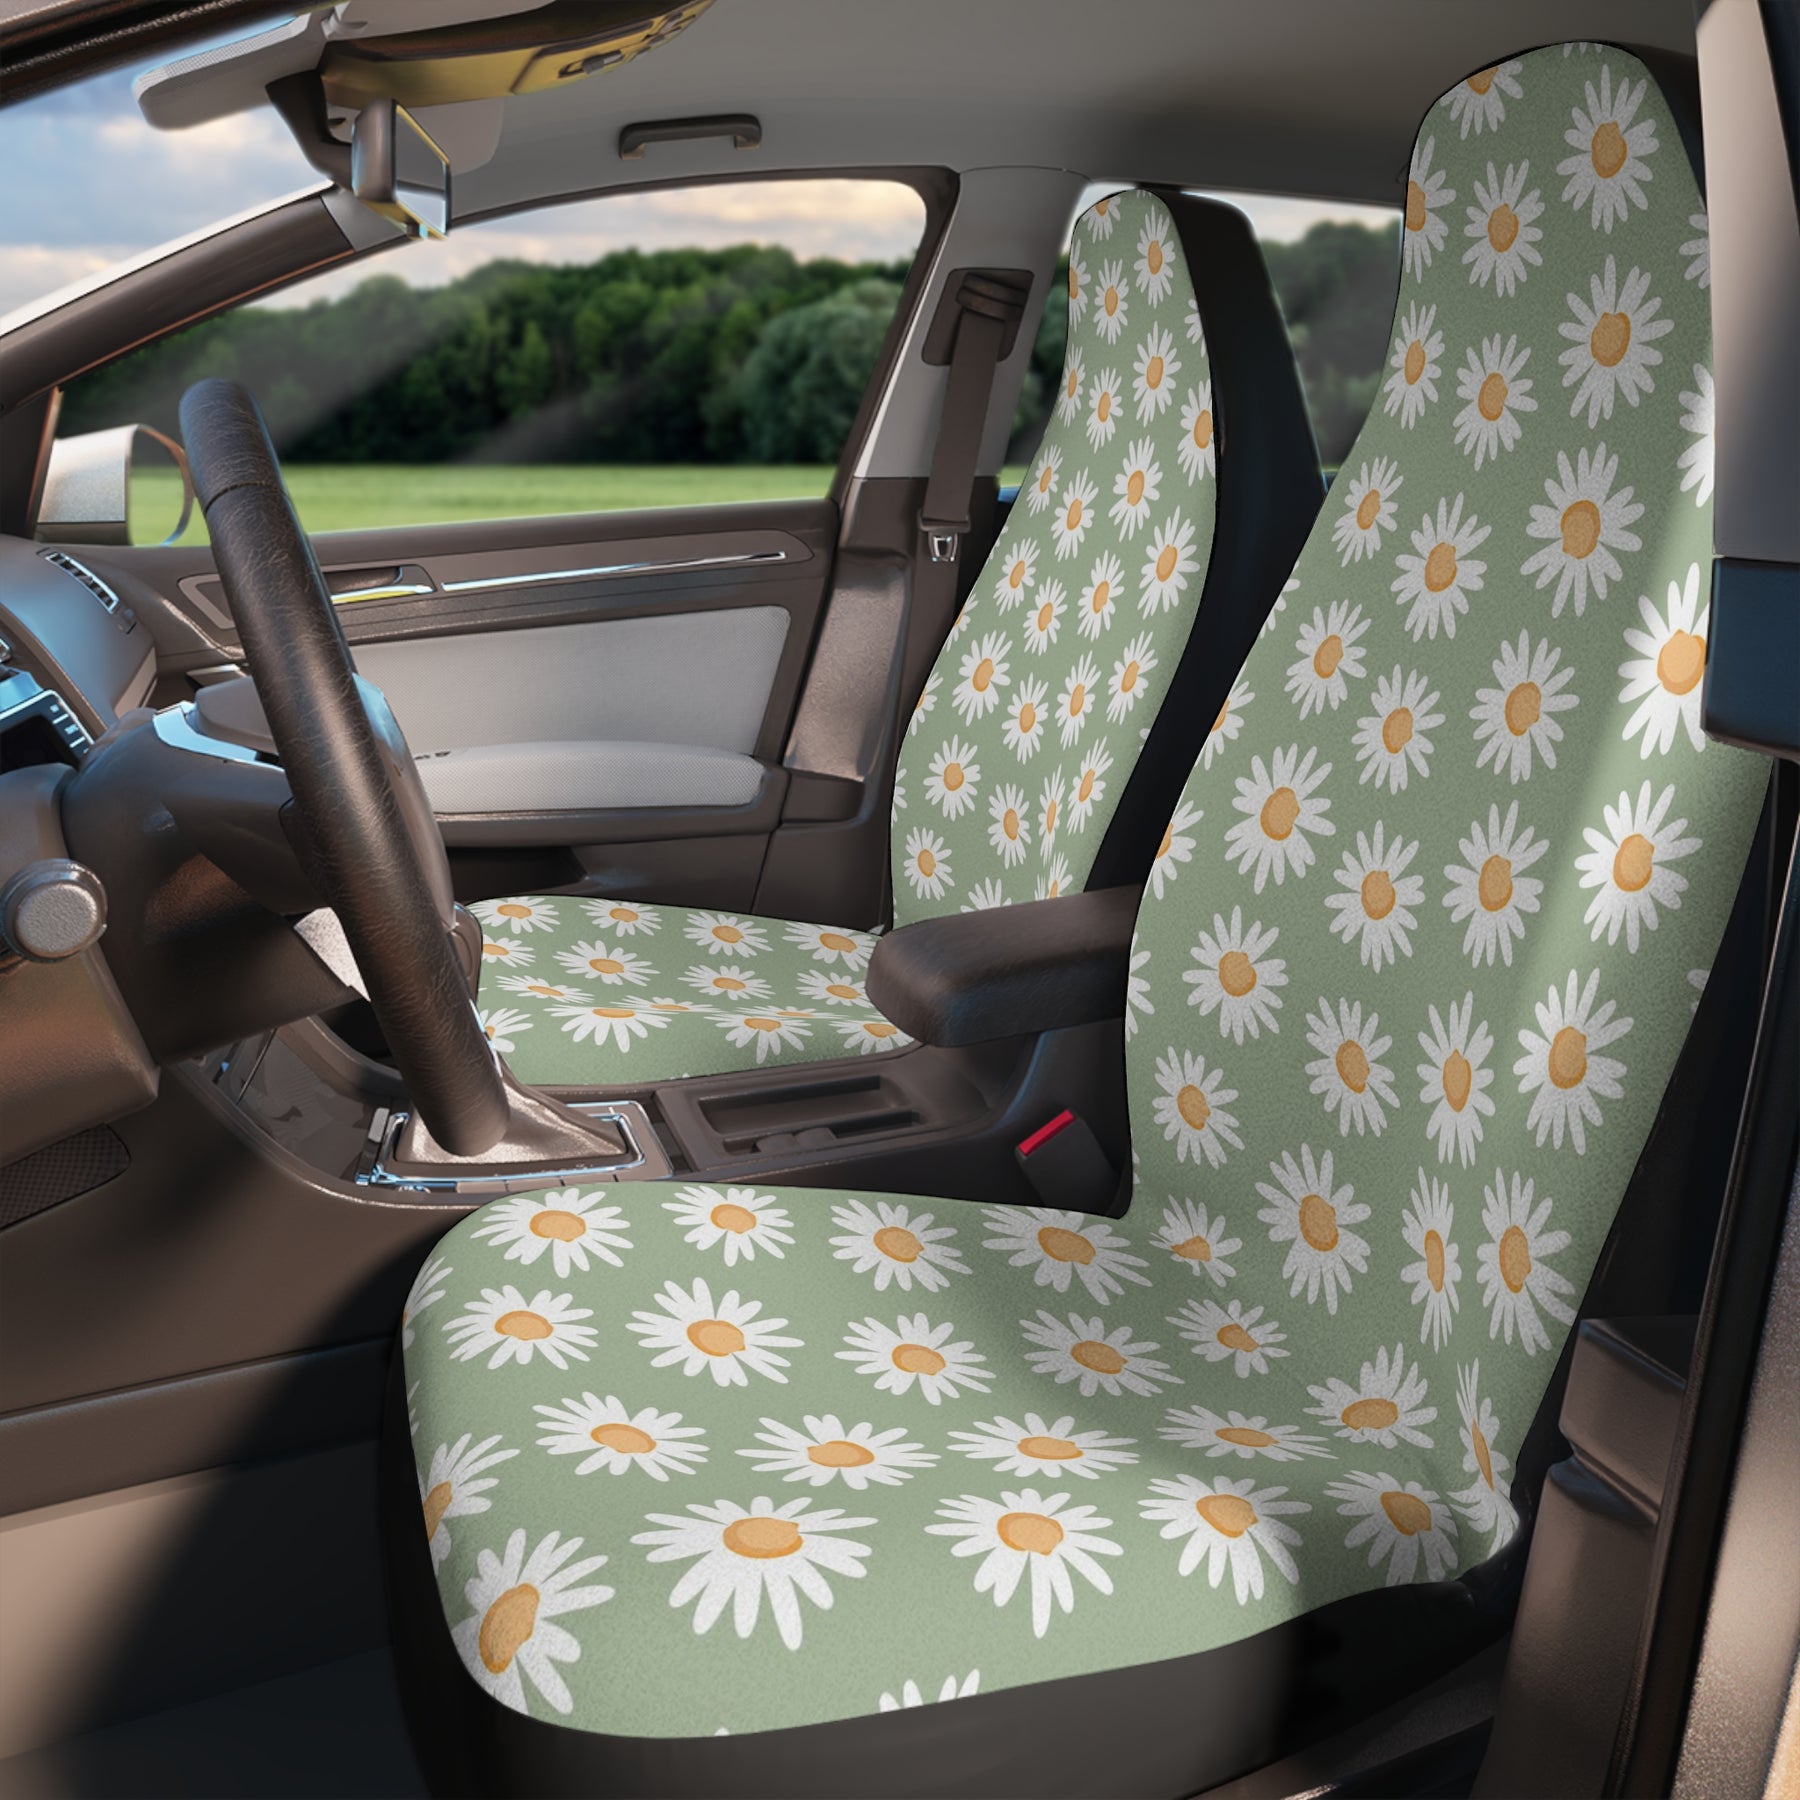 Cute Car Seat Covers Set, Aesthetic Daisy Car Seat Cover, Gift for new driver, Y2K Retro Vintage car accessories, Cottagecore Boho Car Decor